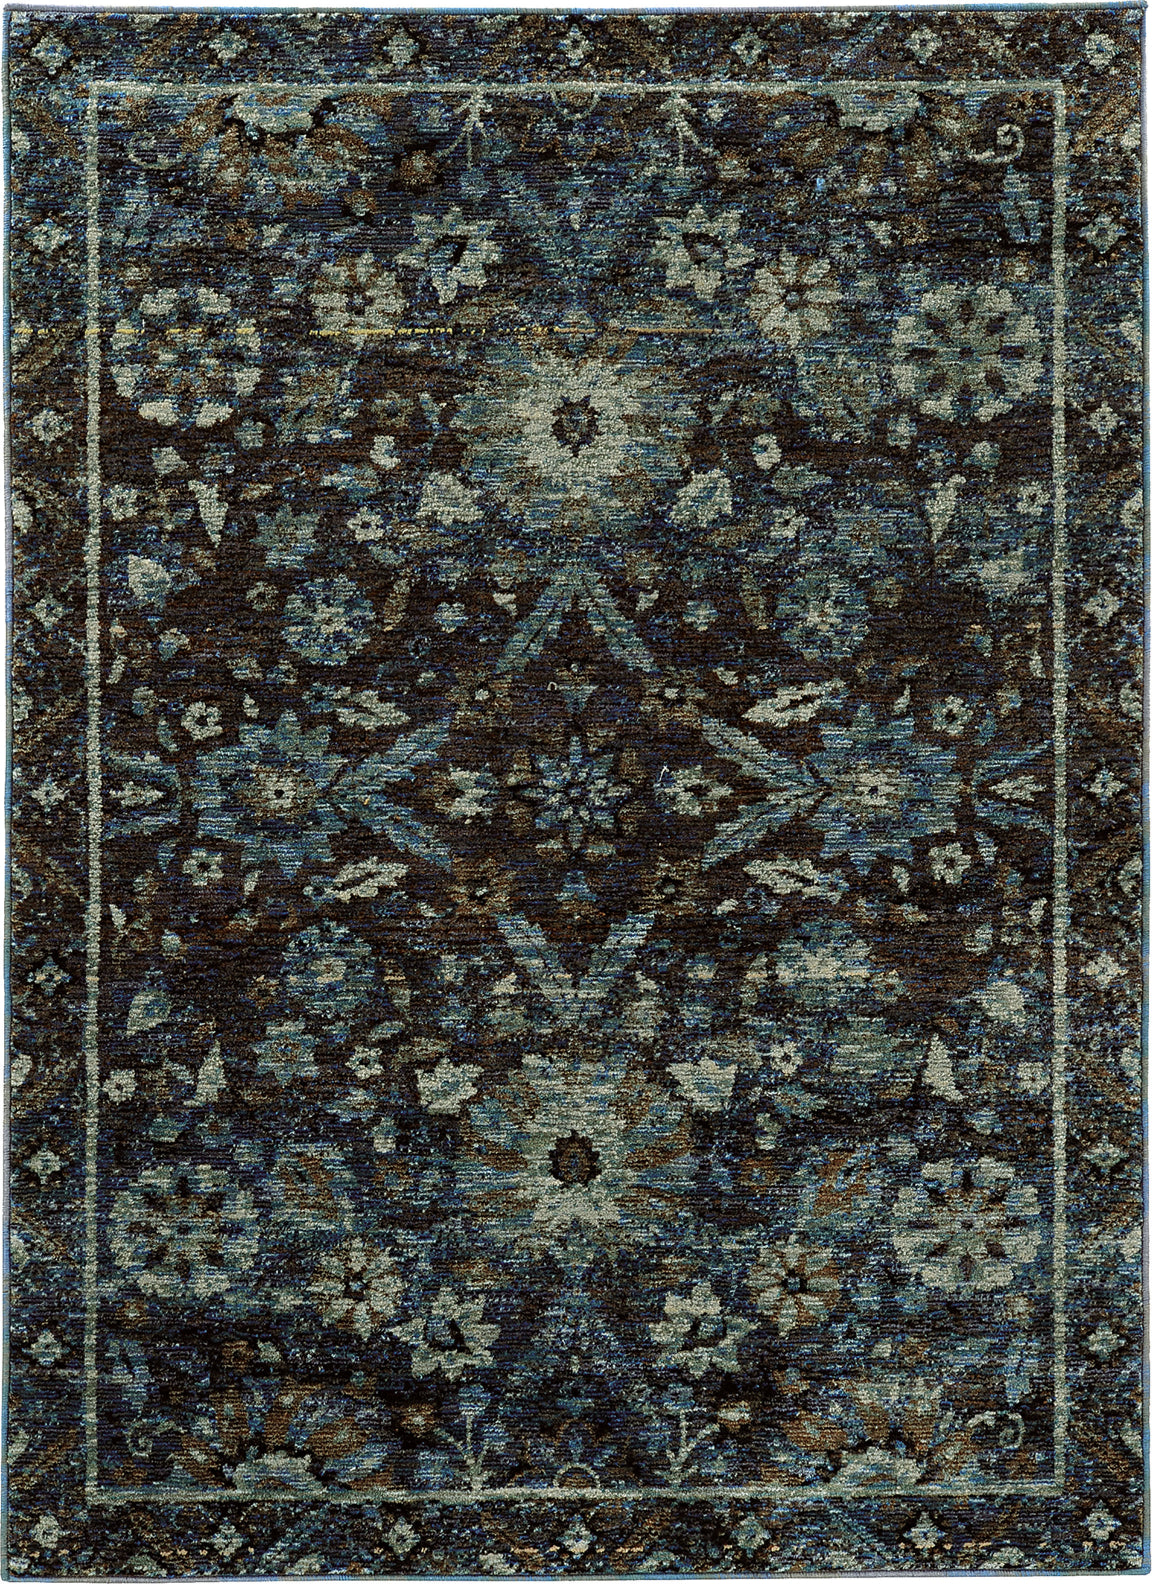 Oriental Weavers Andorra 7124A Navy/ Blue Area Rug main image Featured